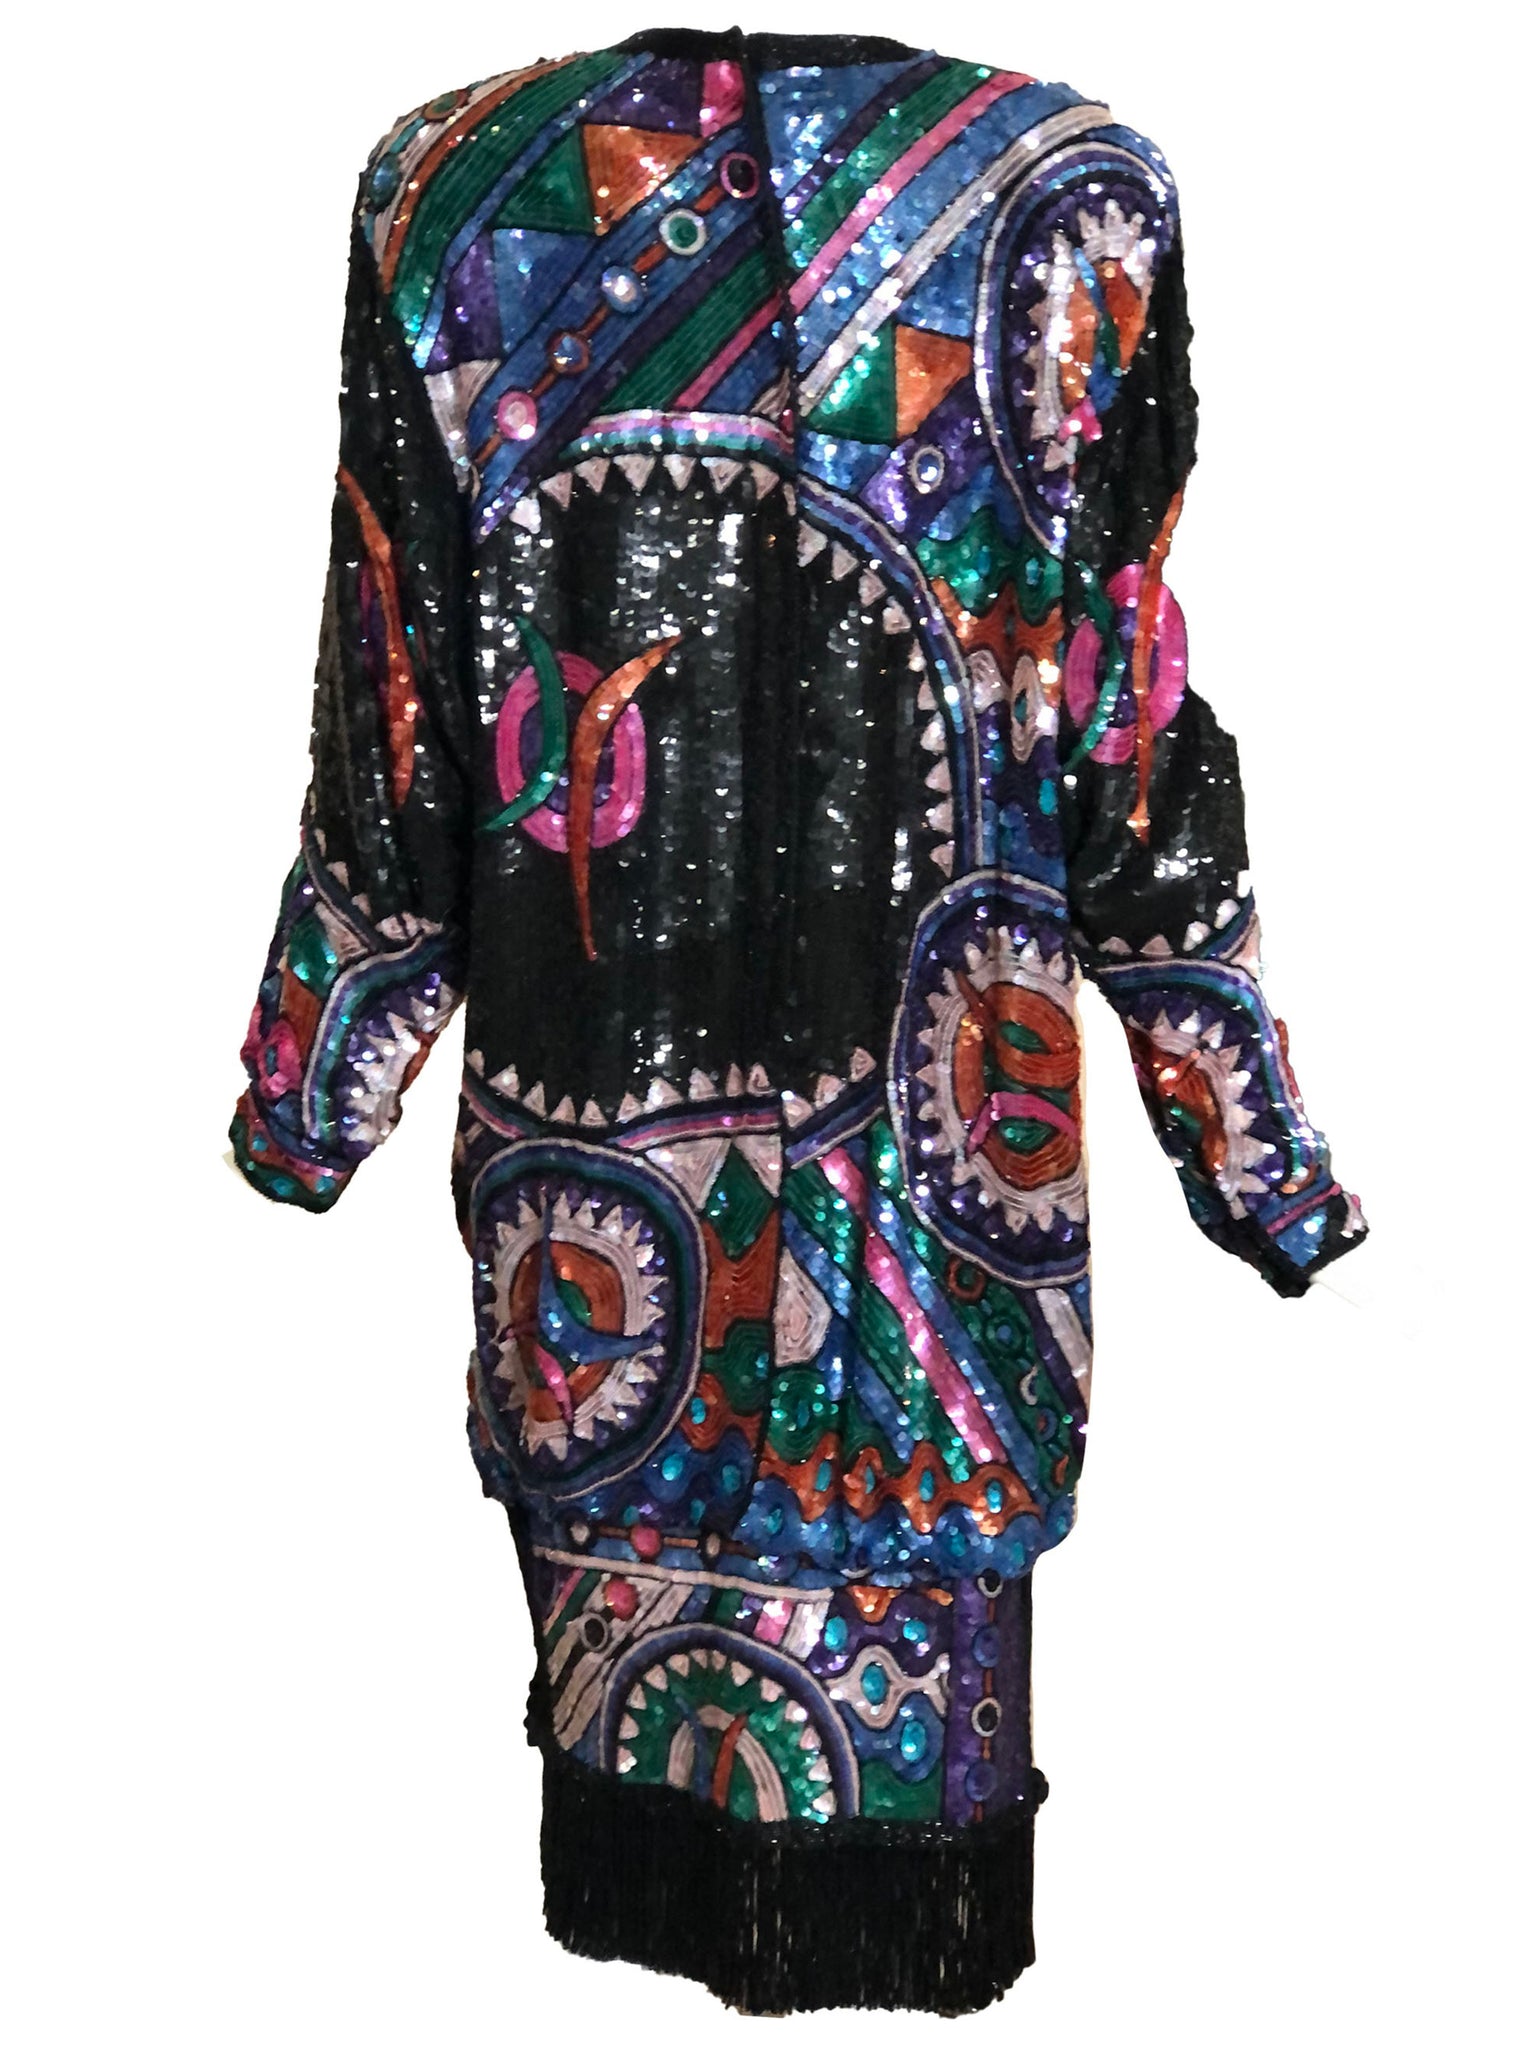 Judith Ann 80s Extravagantly Beaded and Sequined Rainbow Fantasy Dress Back 3 of 6